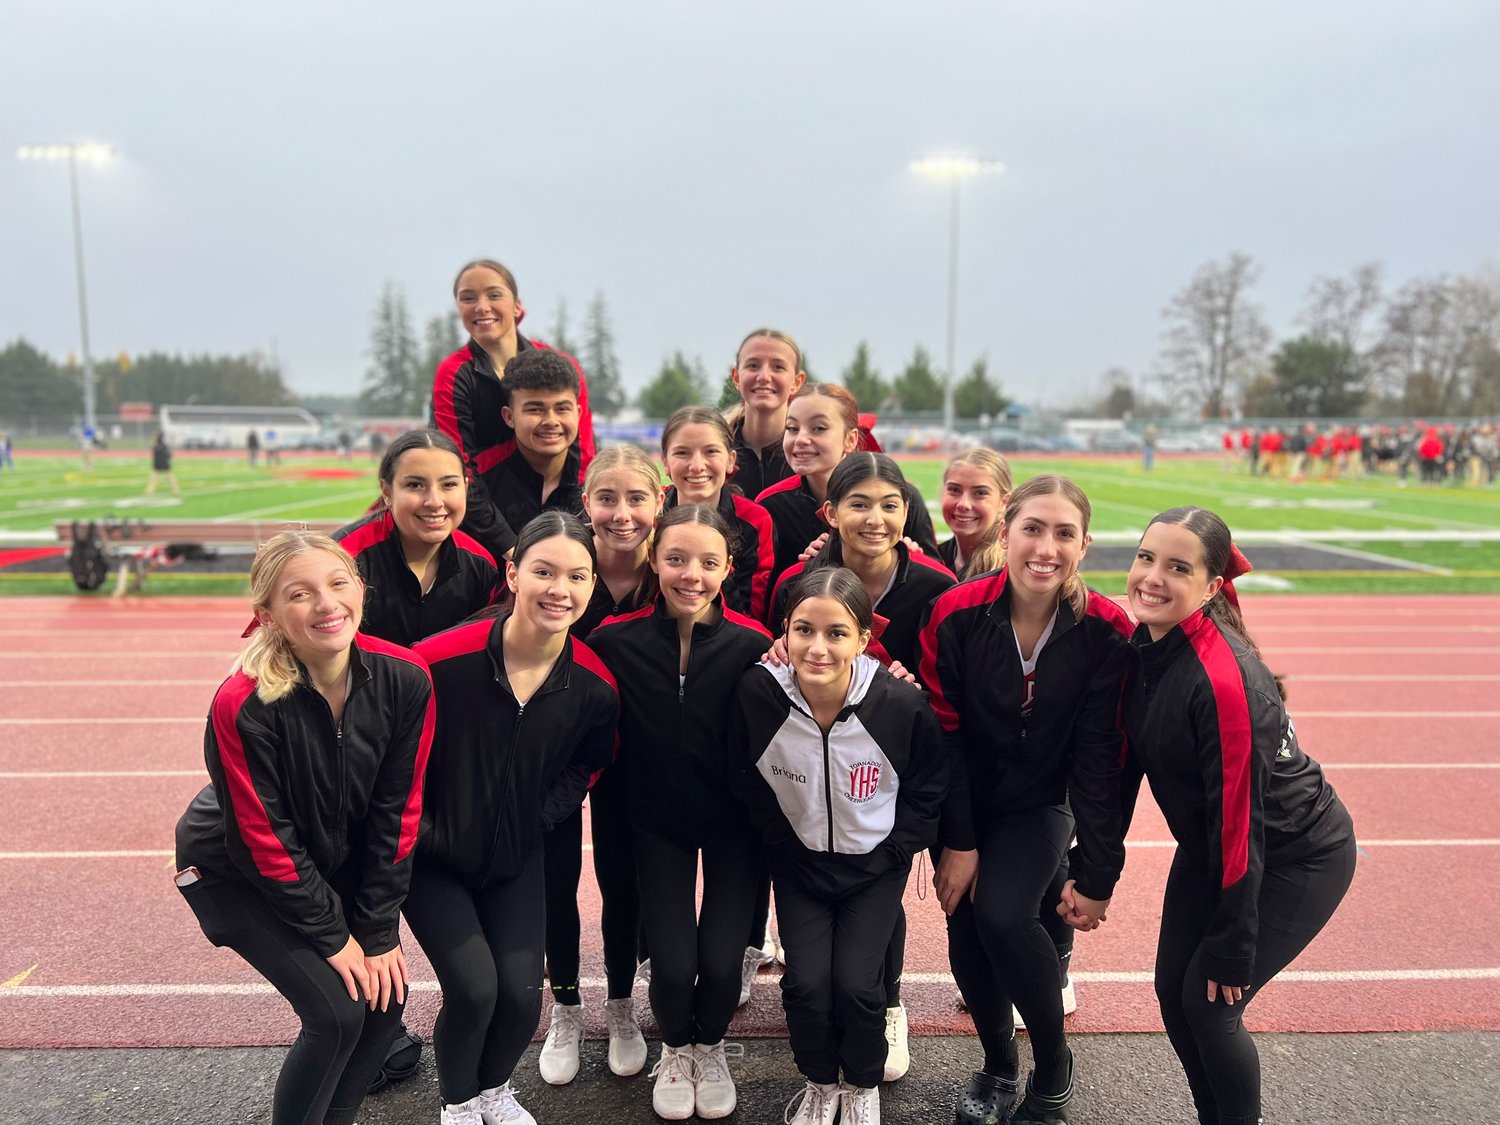 The Yelm cheerleading team is pictured.